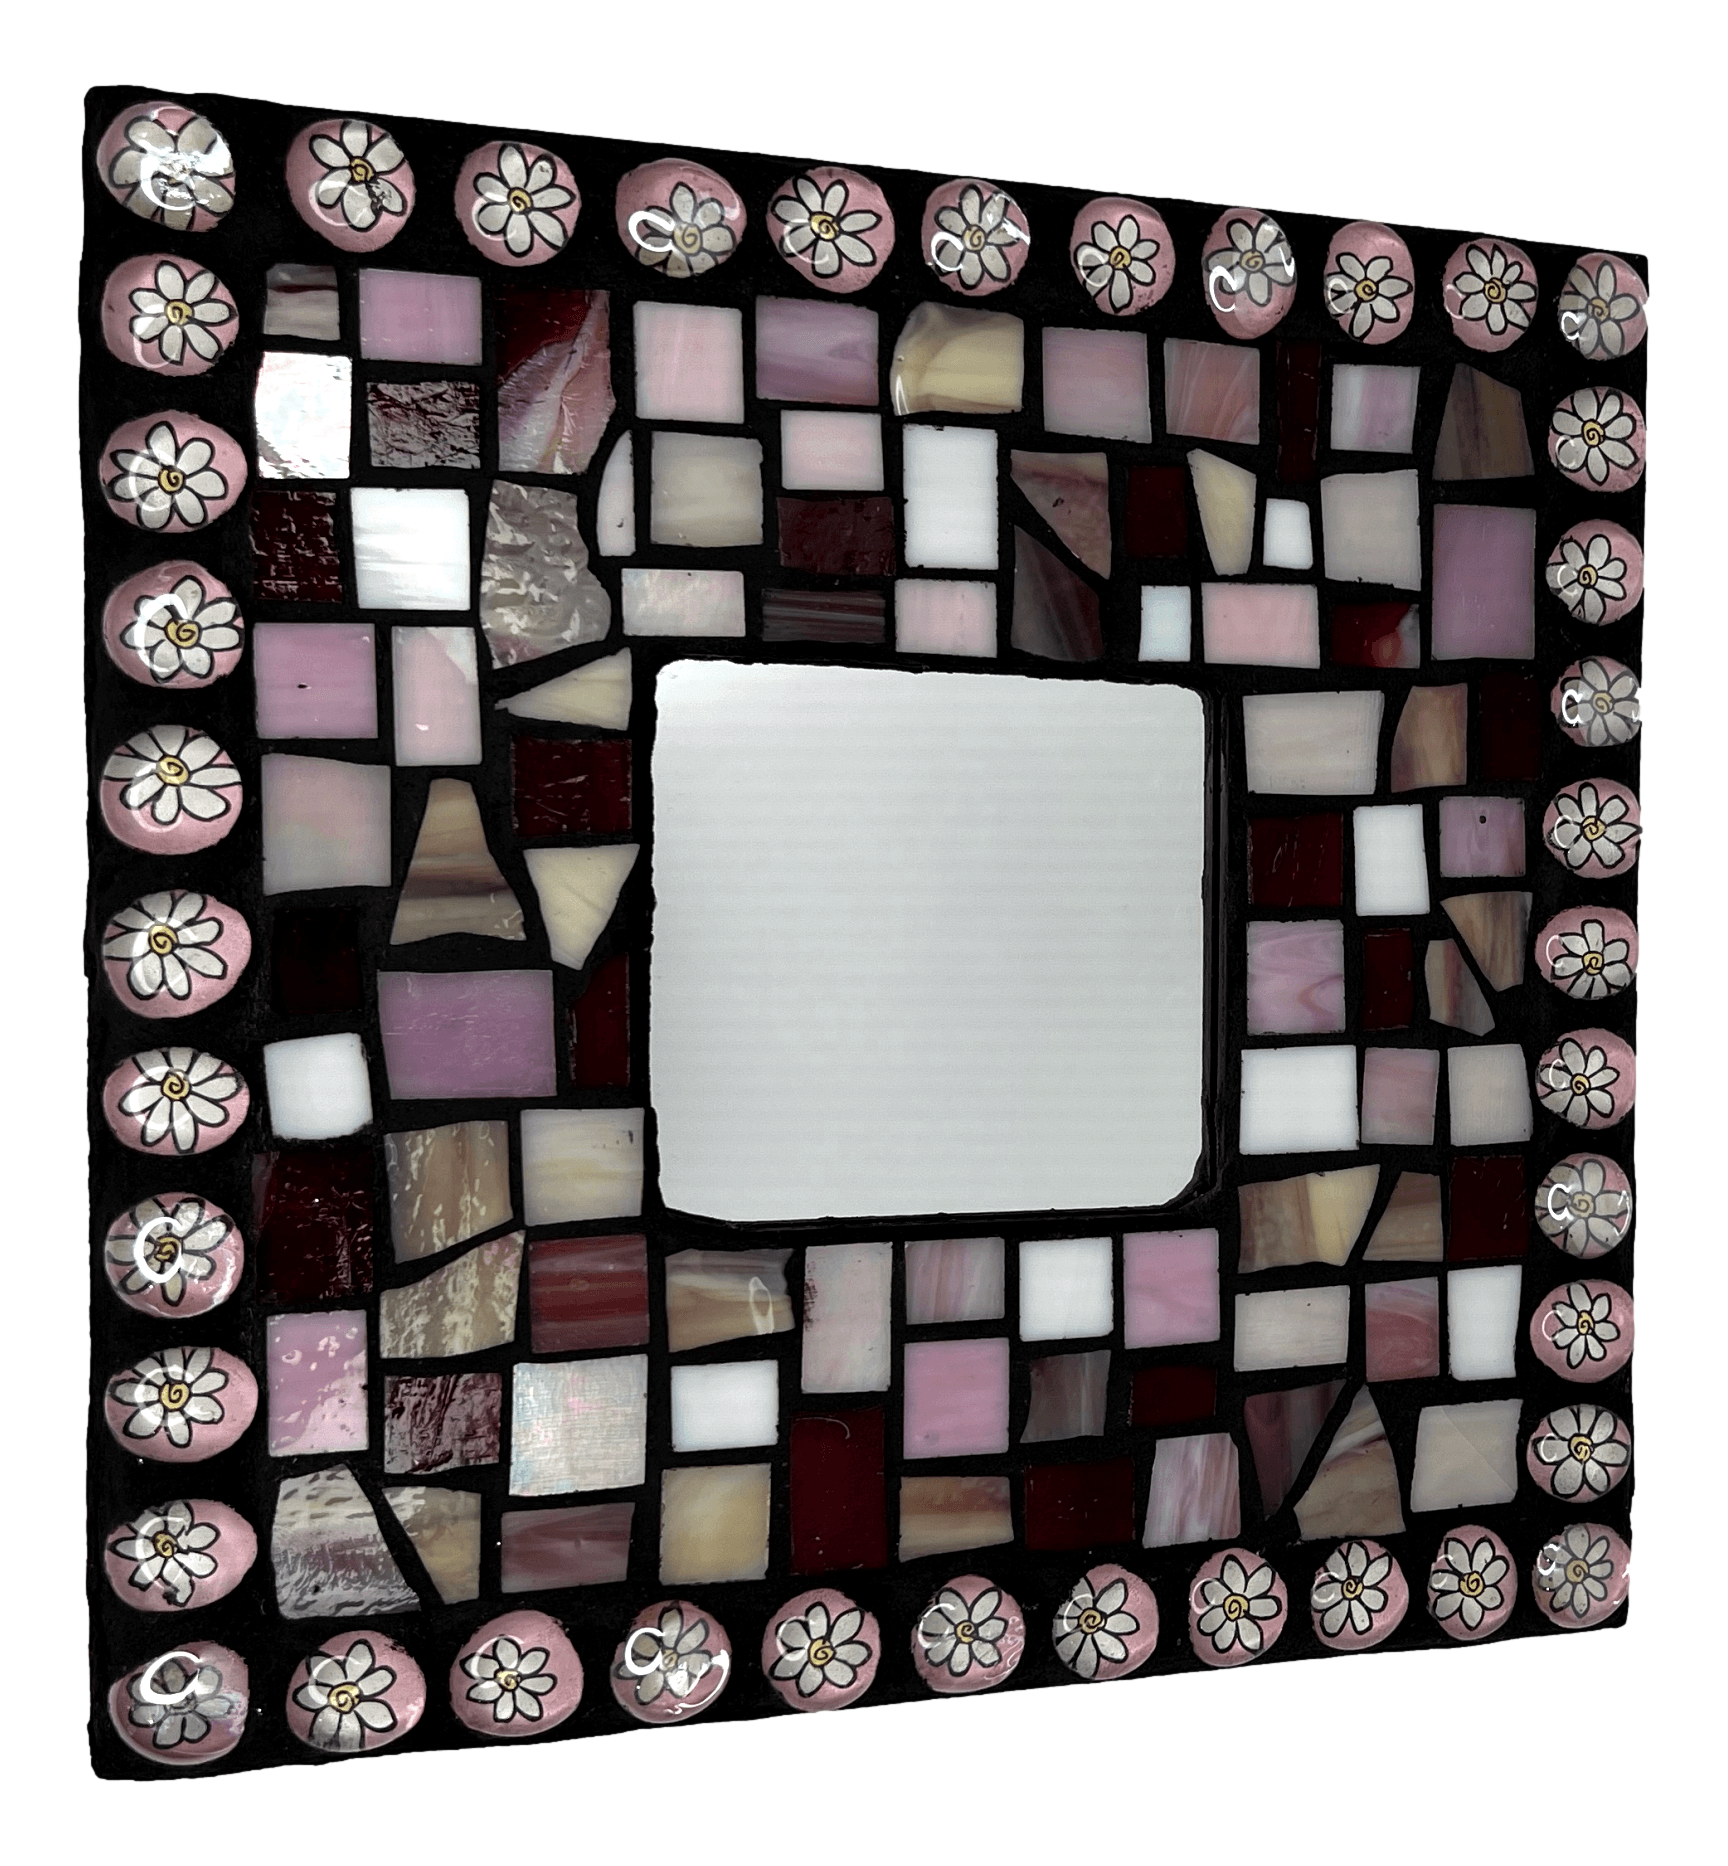 Mirror Wall Hanging Squared Wood Pink Tone Mosaic Tiles Daisy Border L: 10 inches X W: 10 inches - Ysleta Mission Gift Shop- VOTED El Paso's Best Gift Shop